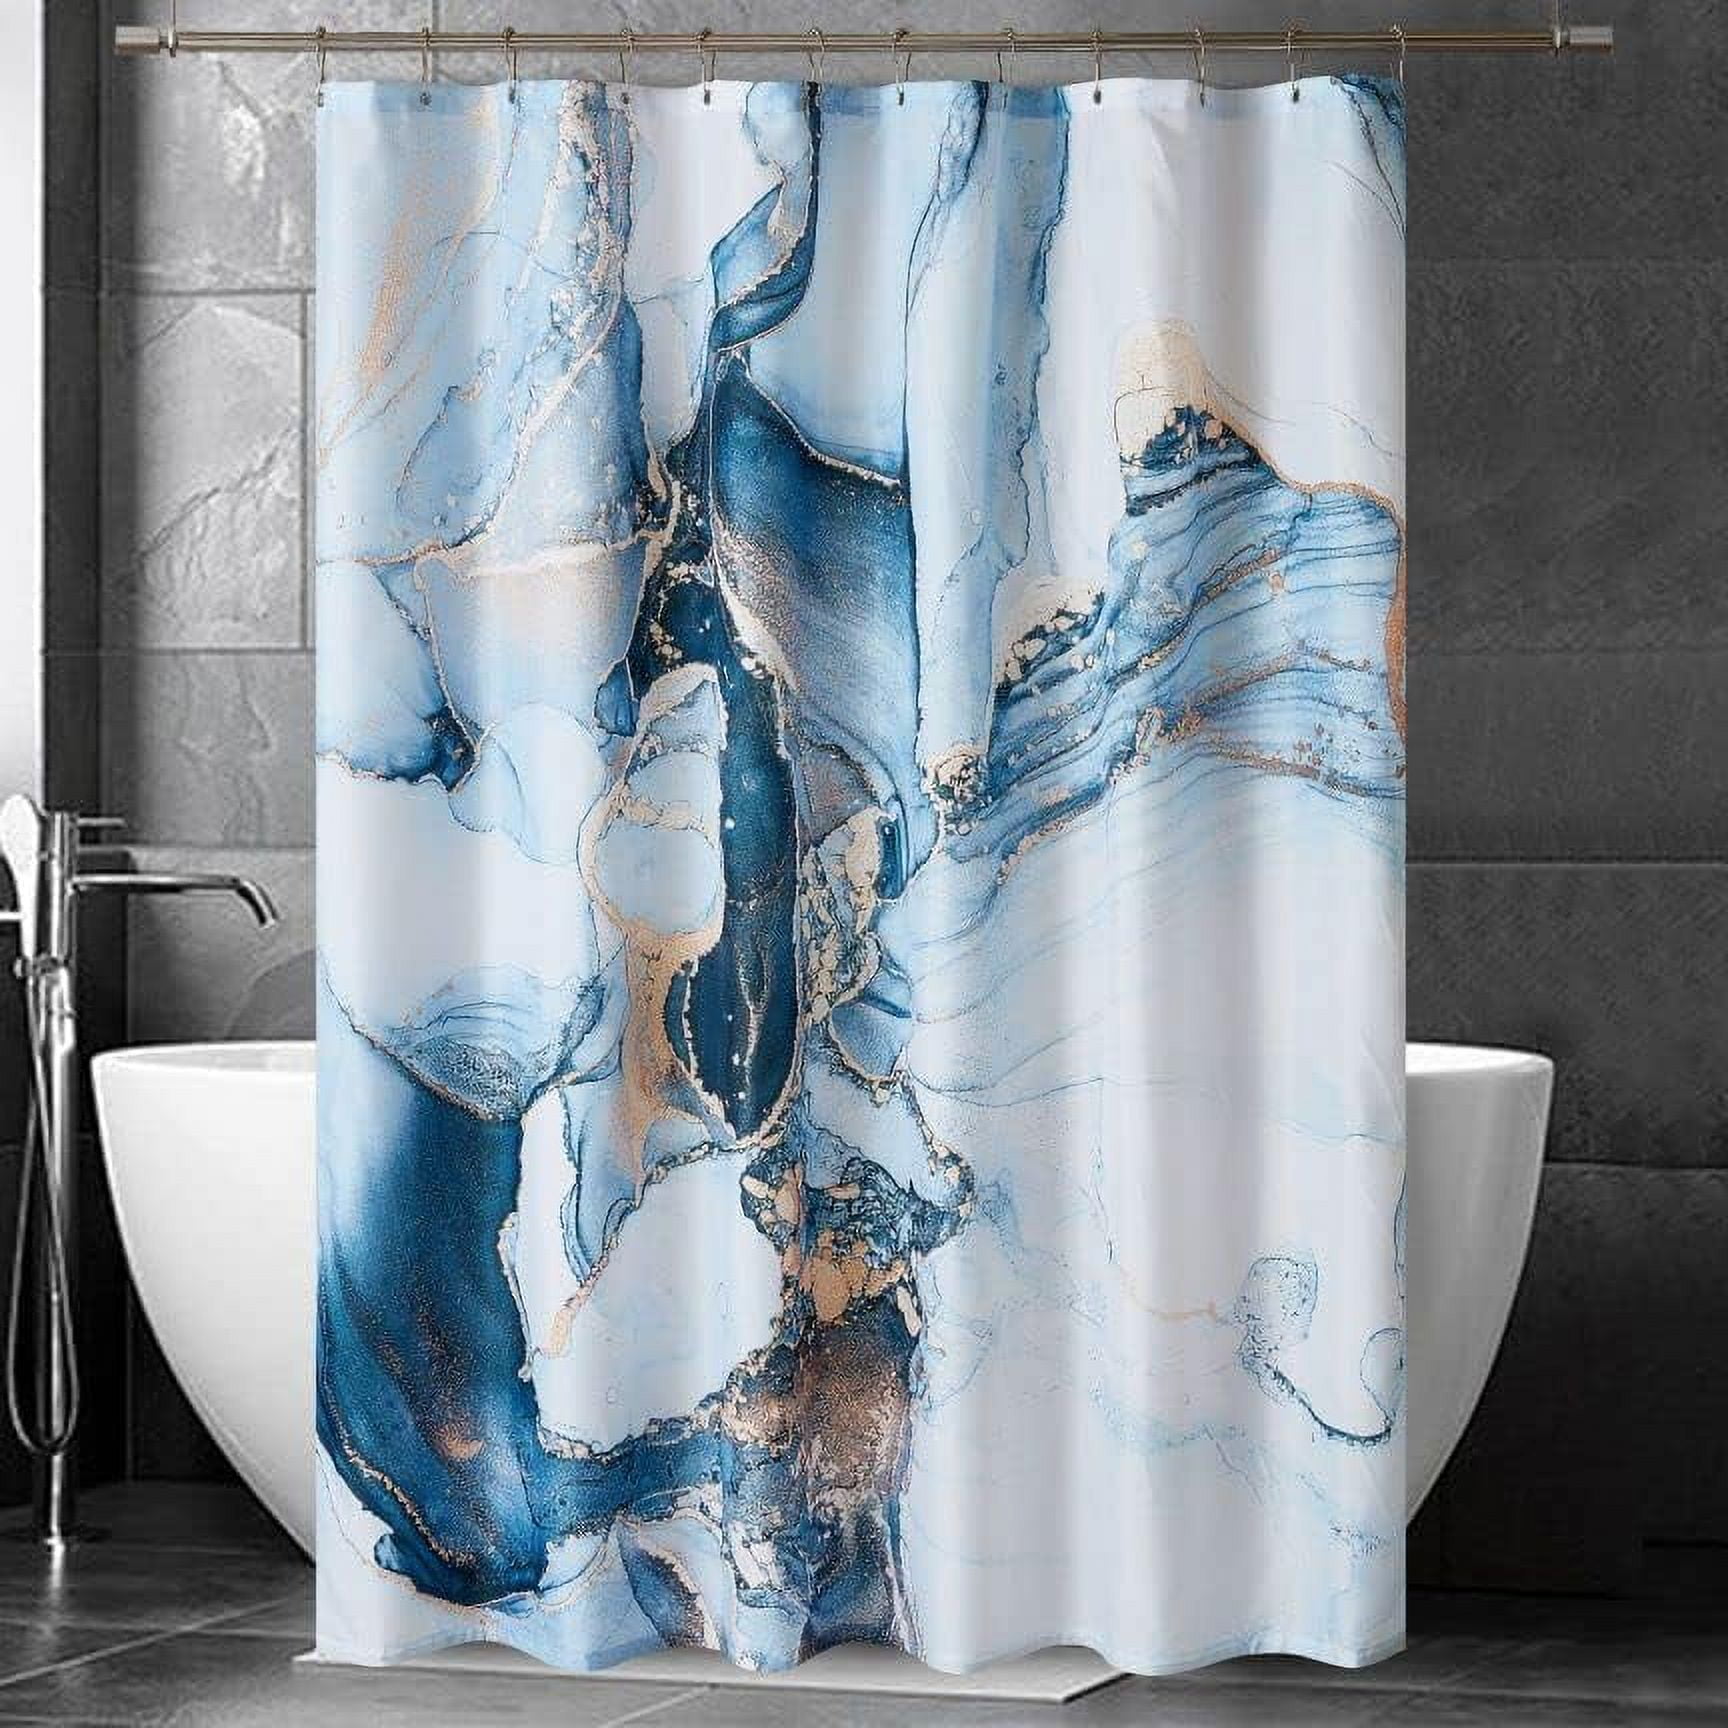 Blue Gold Marble Shower Curtain Set Abstract Granite Pattern Curtains For Bathroom Décor Luxury Modern Waterproof Bath Accessories With 9 Metal Hooks 54x78 Inch Com